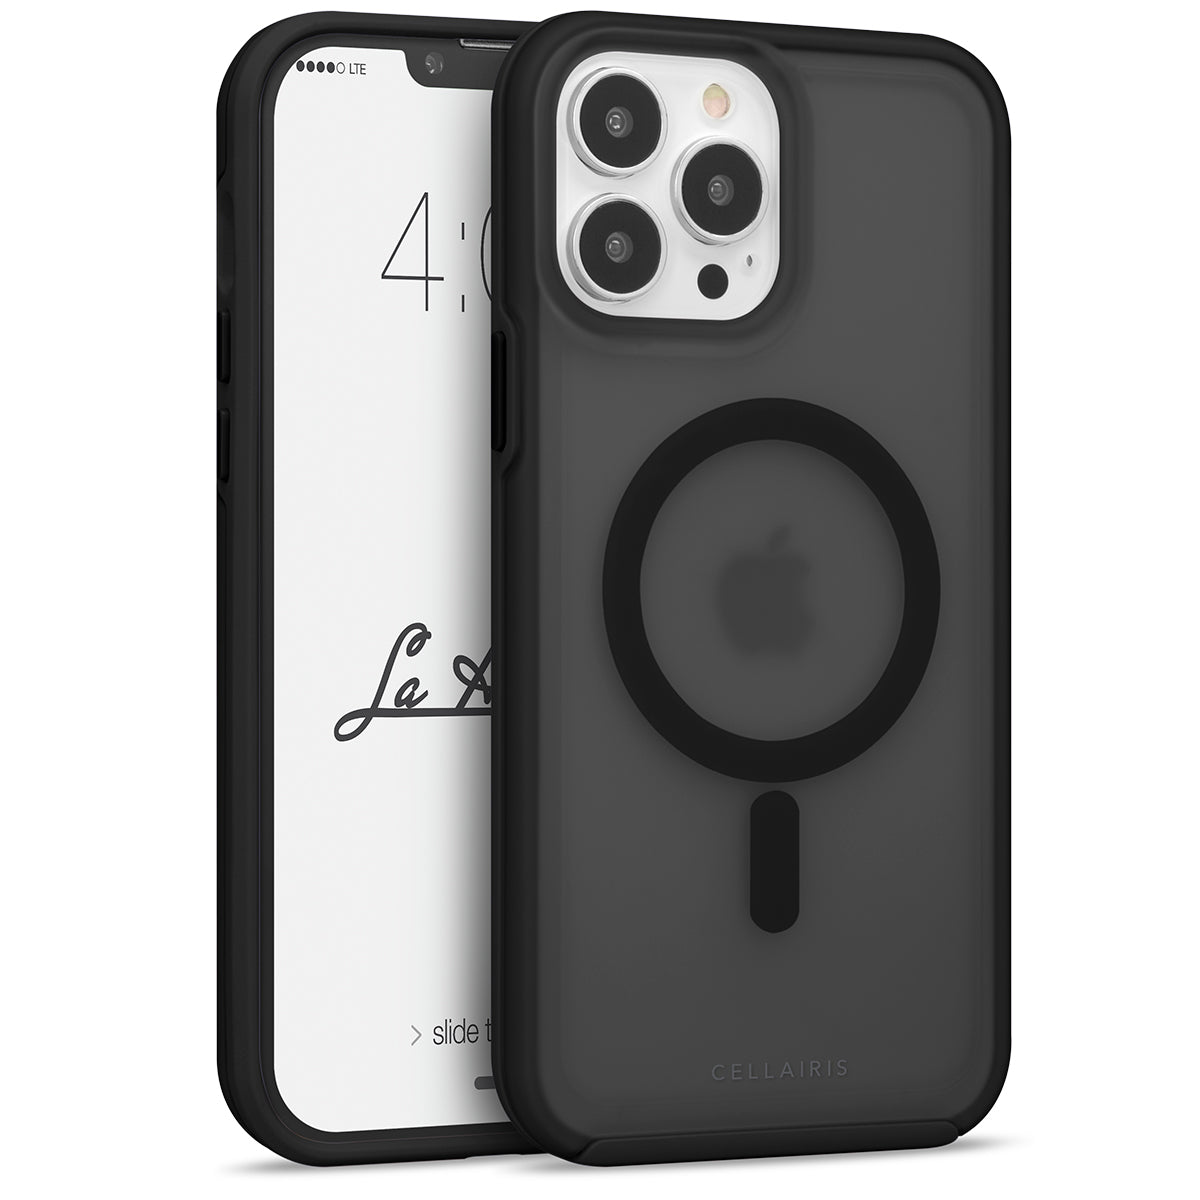 Case round-up for the iPhone 13 Pro Max